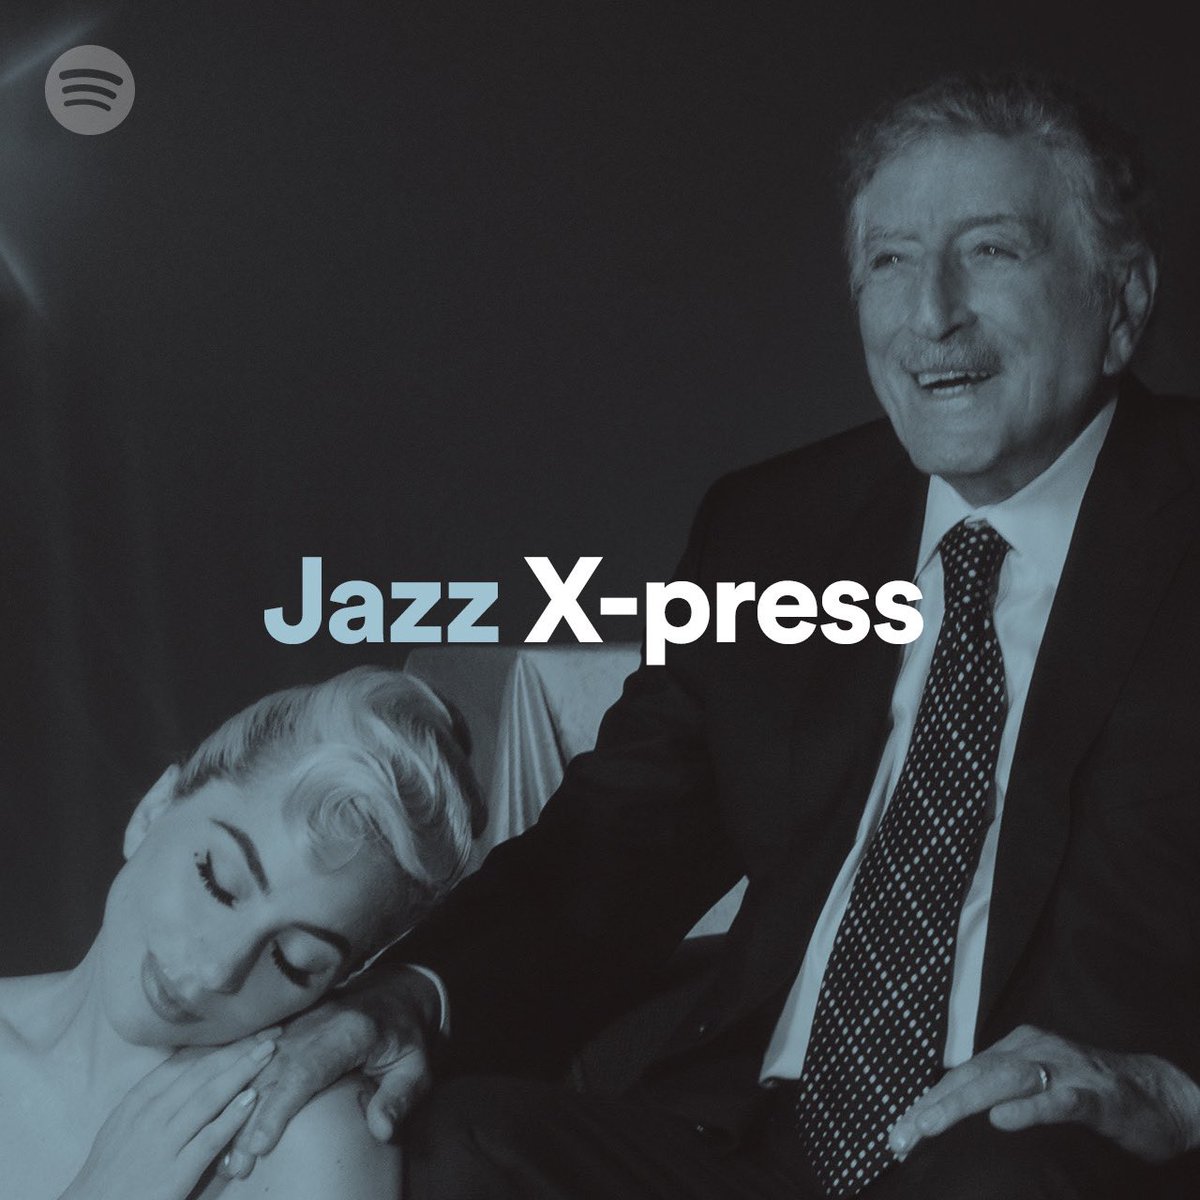 Listen to “I Get A Kick Out Of You” with @itstonybennett on #JazzXpress 🎺✨ @Spotify  